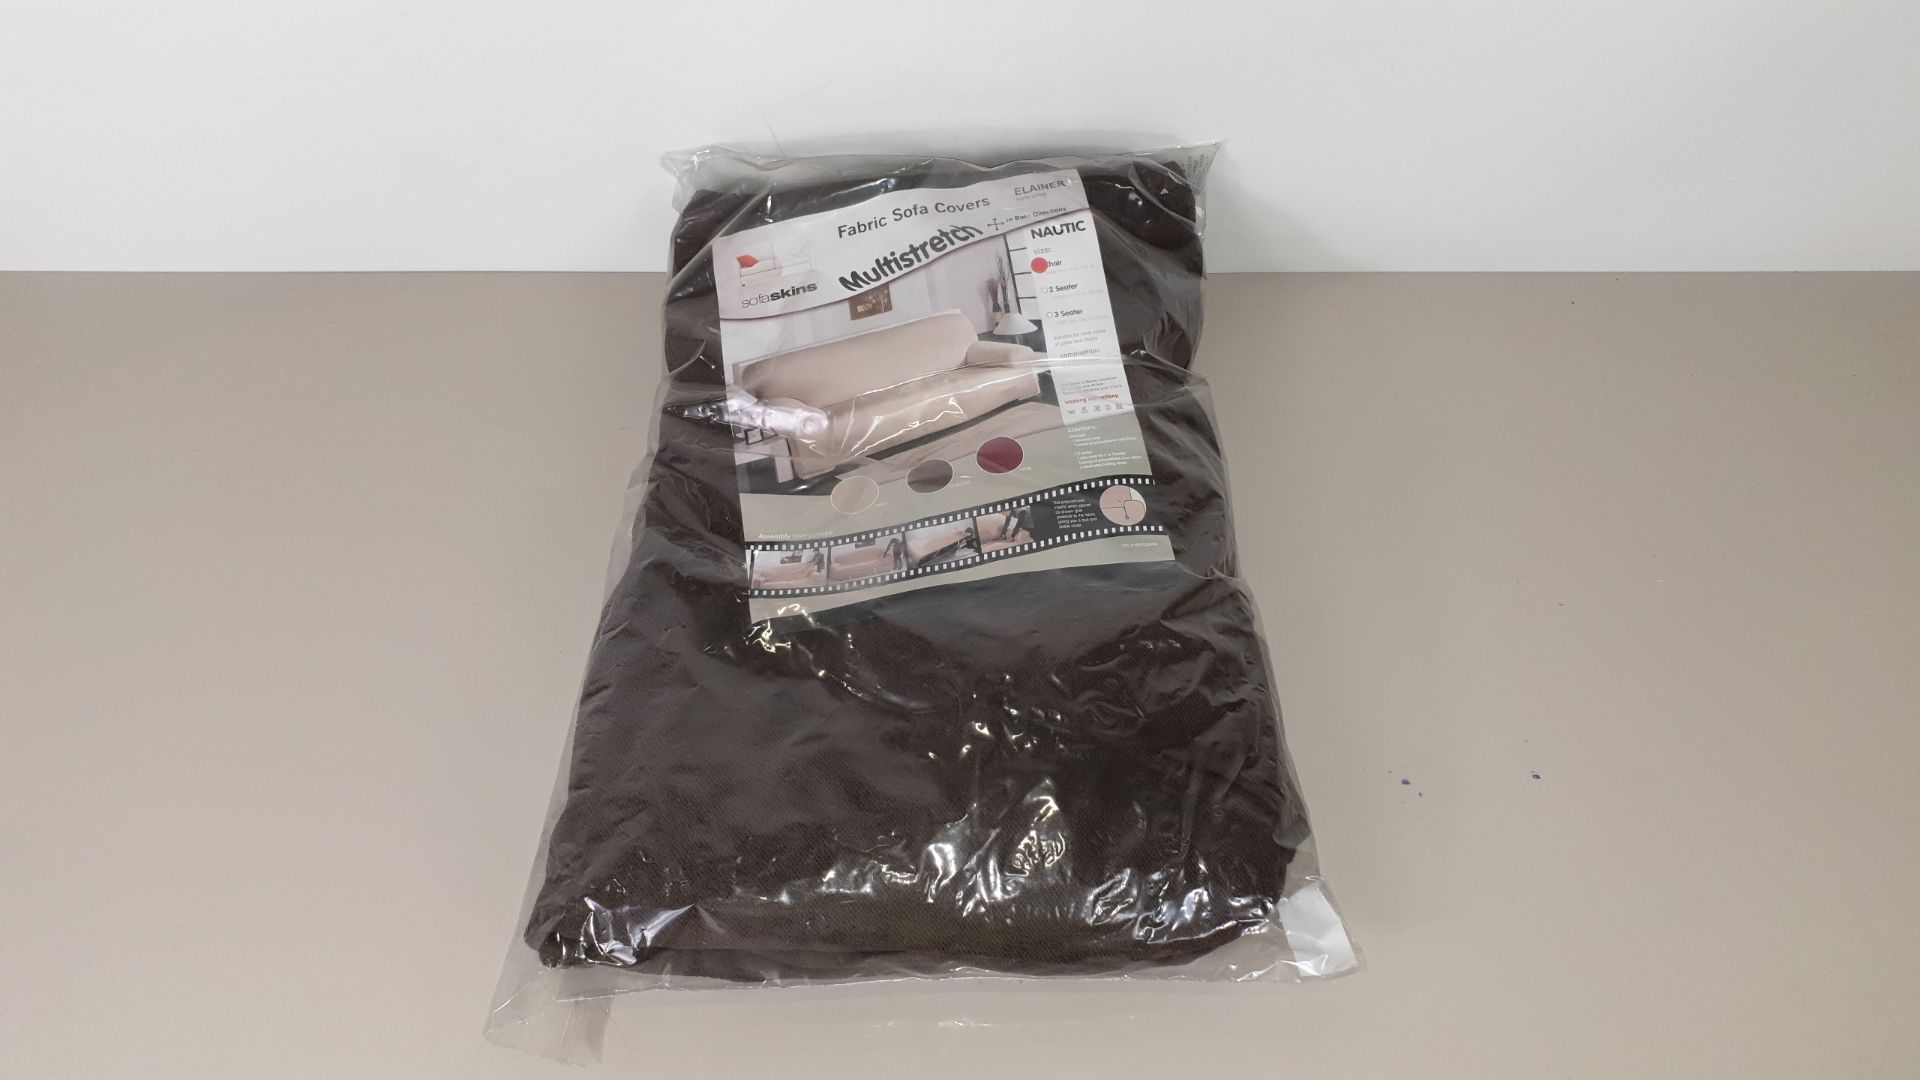 12 X BRAND NEW MULTISTRETCH SOFASKINS CHAIR COVERS IN BROWN IN 3 BOXES